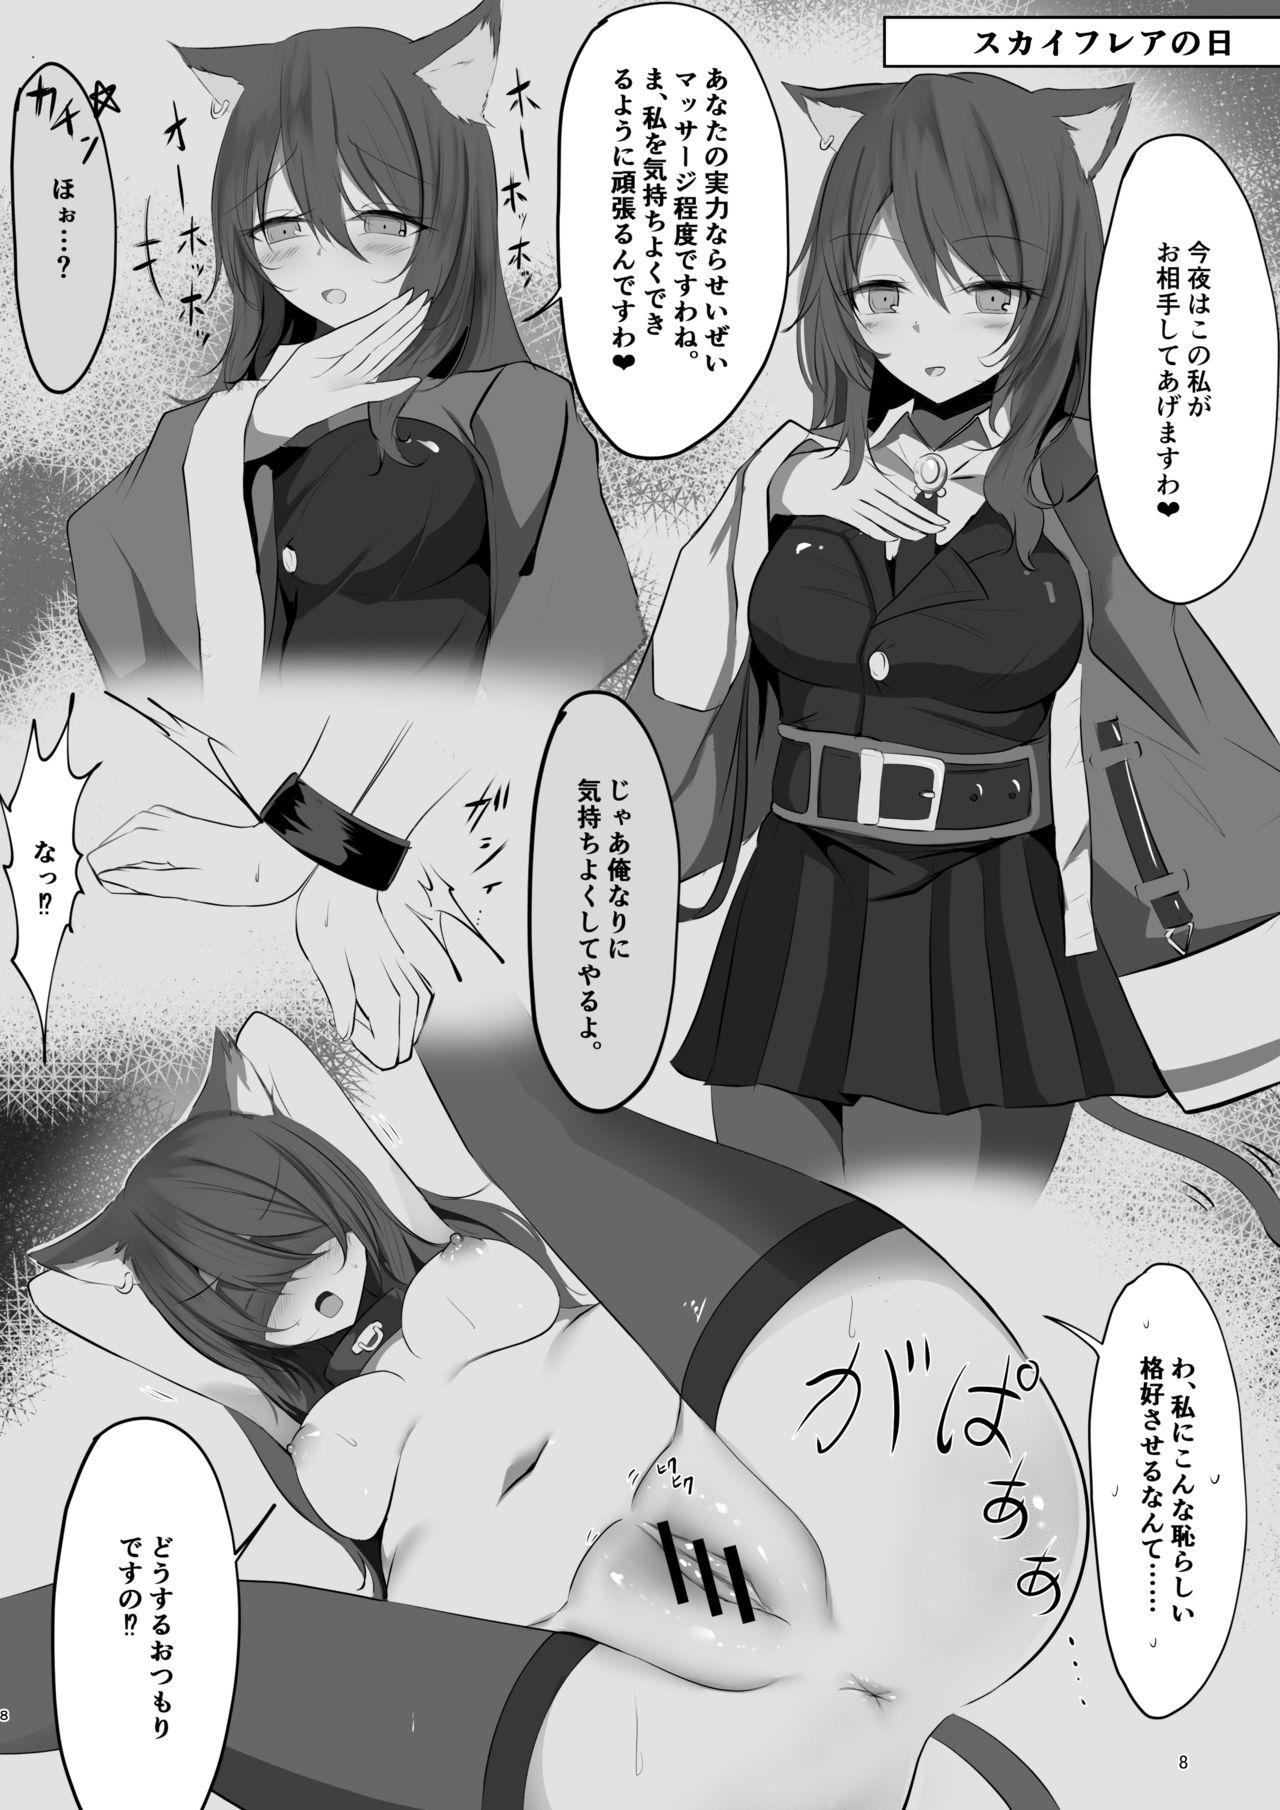 Amateur Porn Free 夜な夜な扇情作戦記録 - Arknights Cowgirl - Page 8